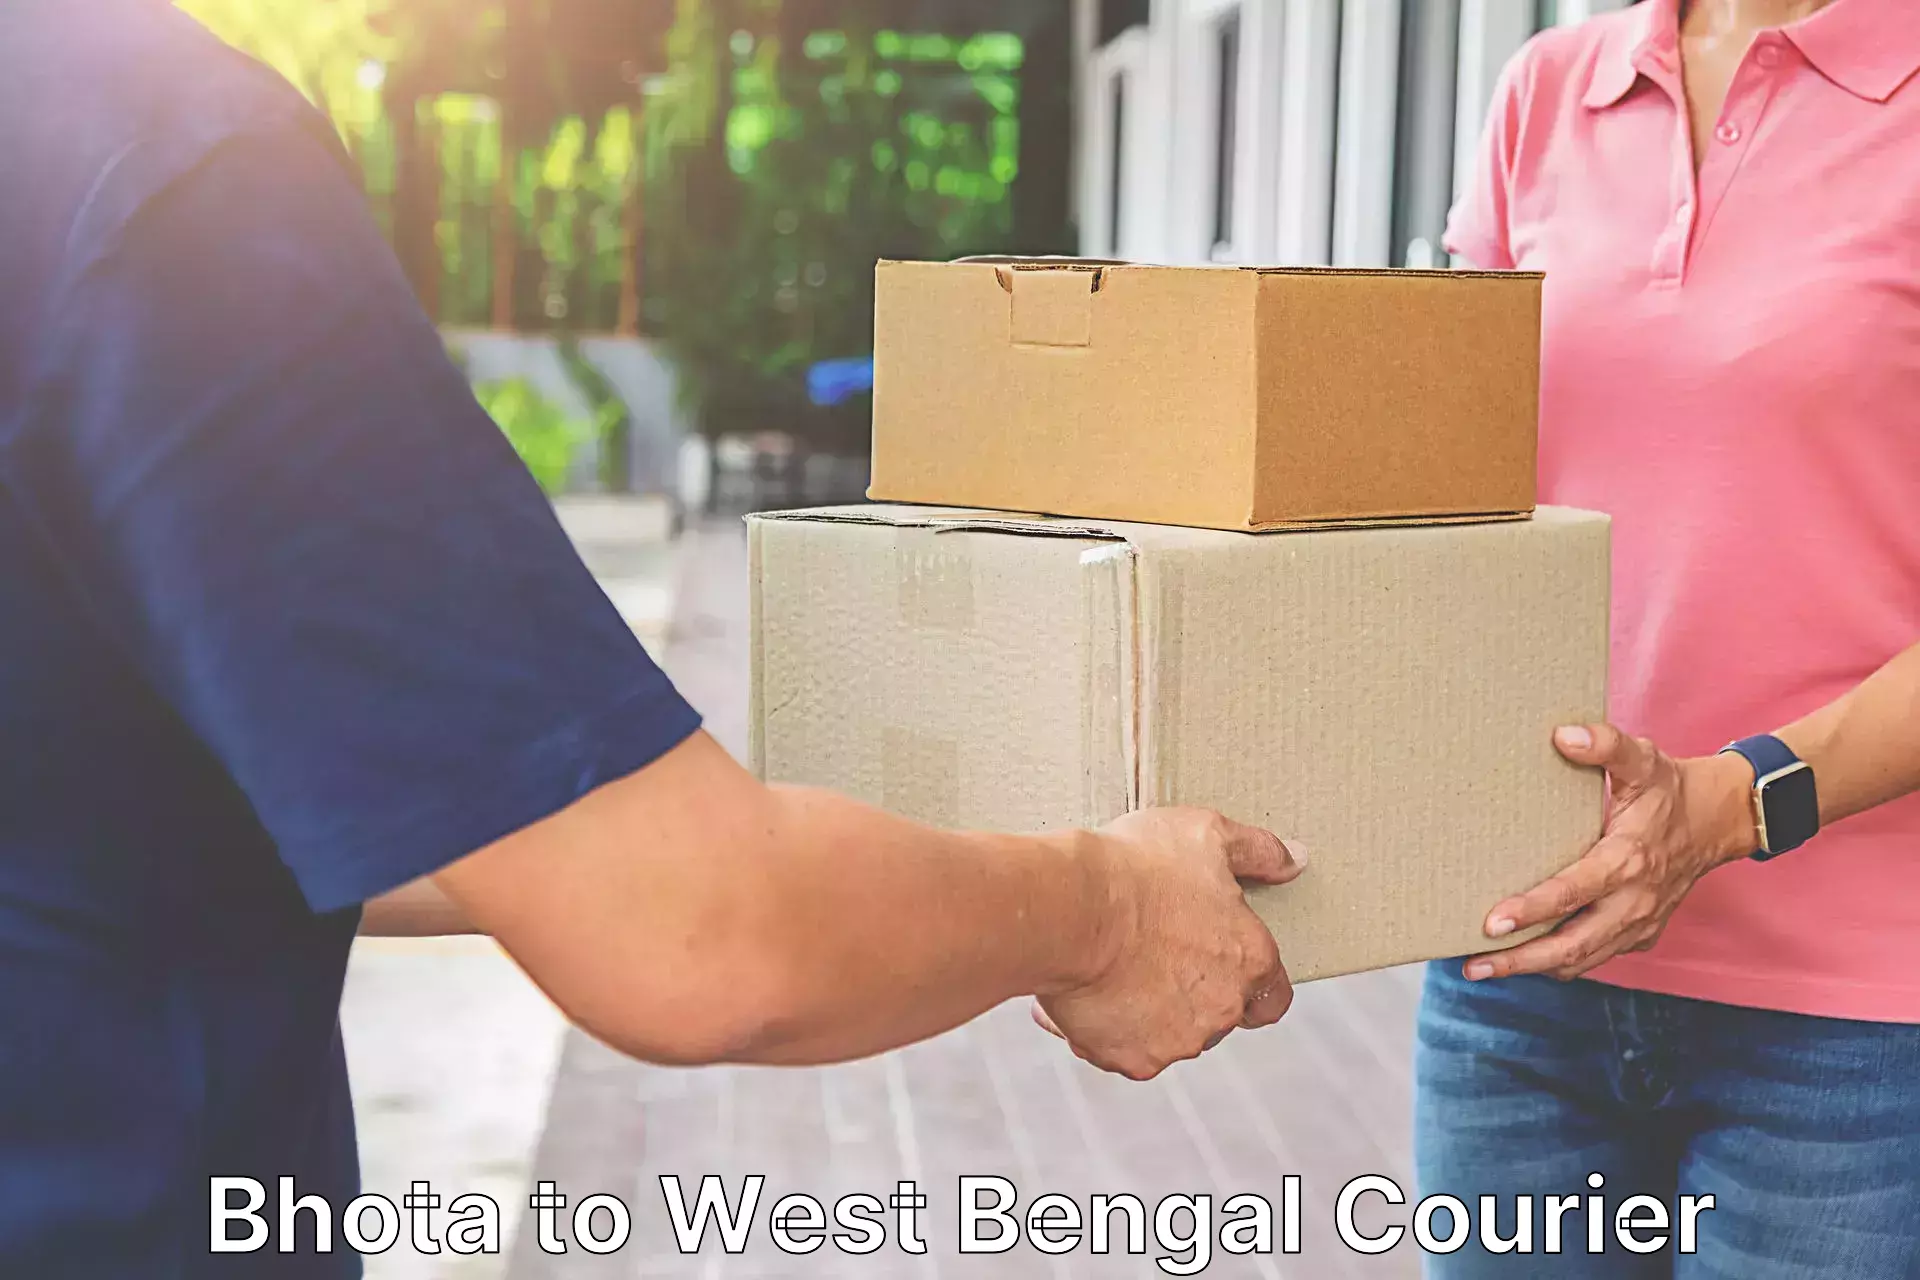 High-speed parcel service Bhota to West Bengal